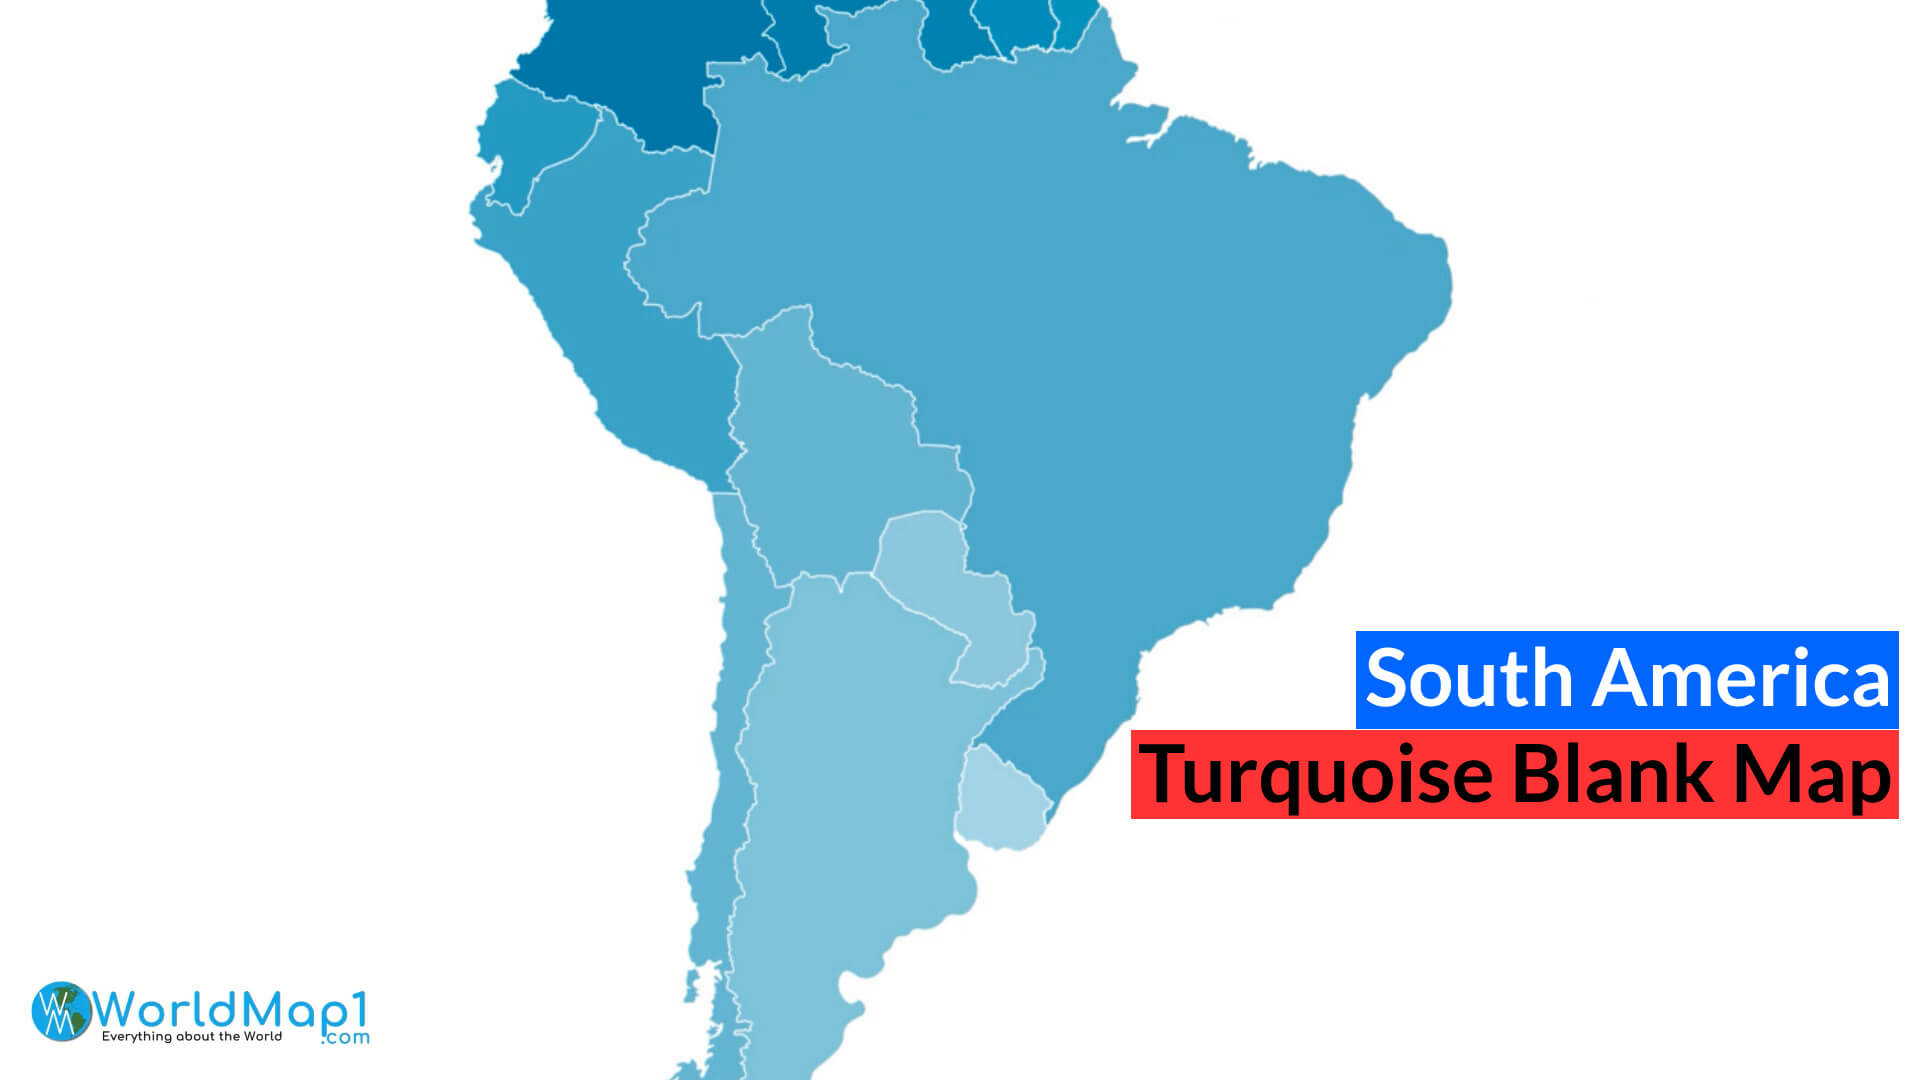 South America Turquoise Blank Map